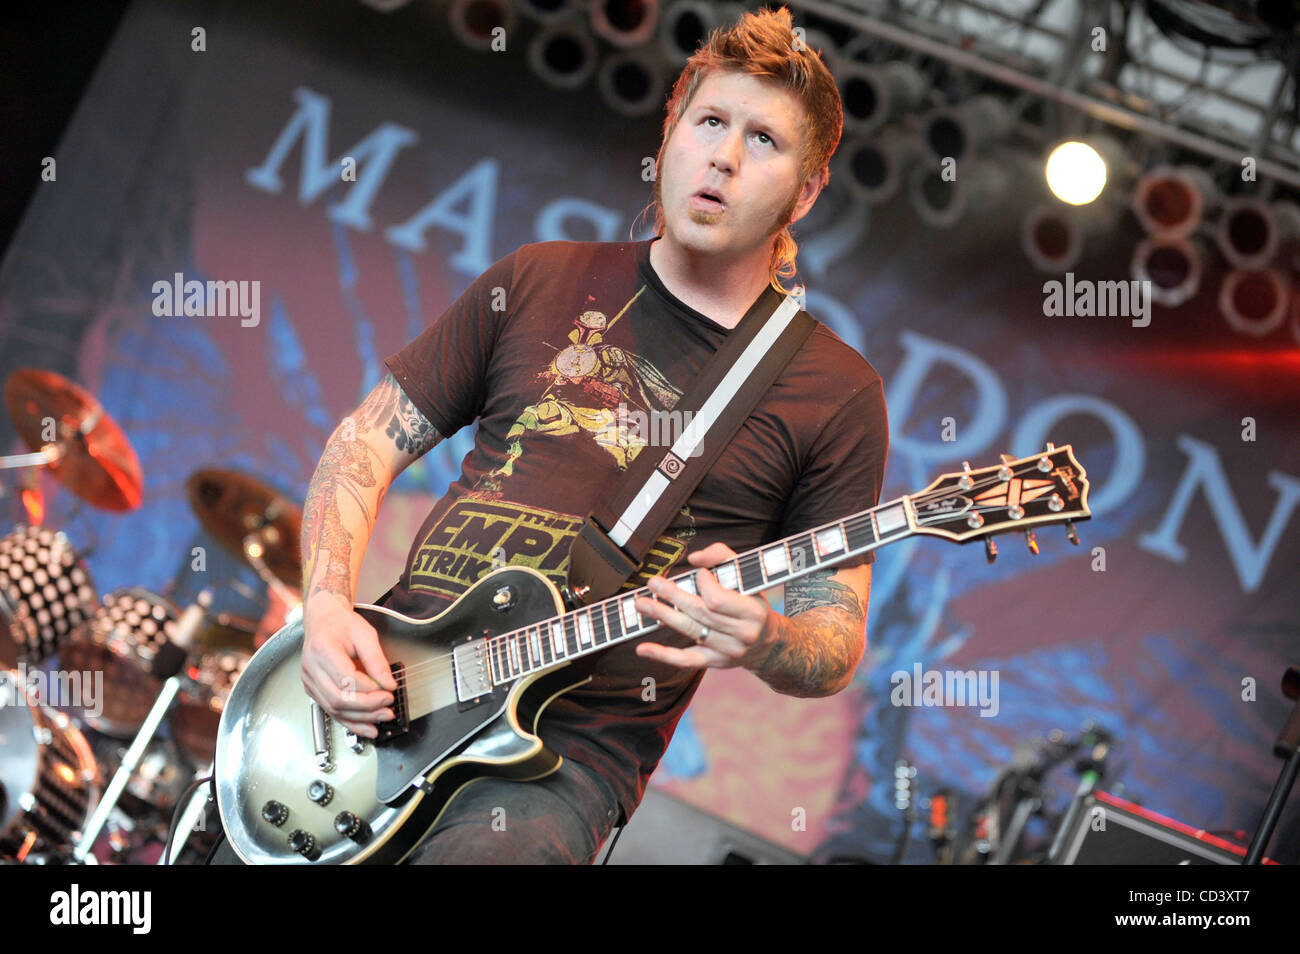 Jun 14, 2008 - Manchester, Tennessee, USA - Guitarist BILL KELLIHER of the band Mastodon performs  live as his current 2008 tour makes a stop at The Bonnaroo Music and Arts Festival. The four-day multi-stage camping festival attracts over 90,000 music fans and is held on a 700-acre farm in Tennessee Stock Photo